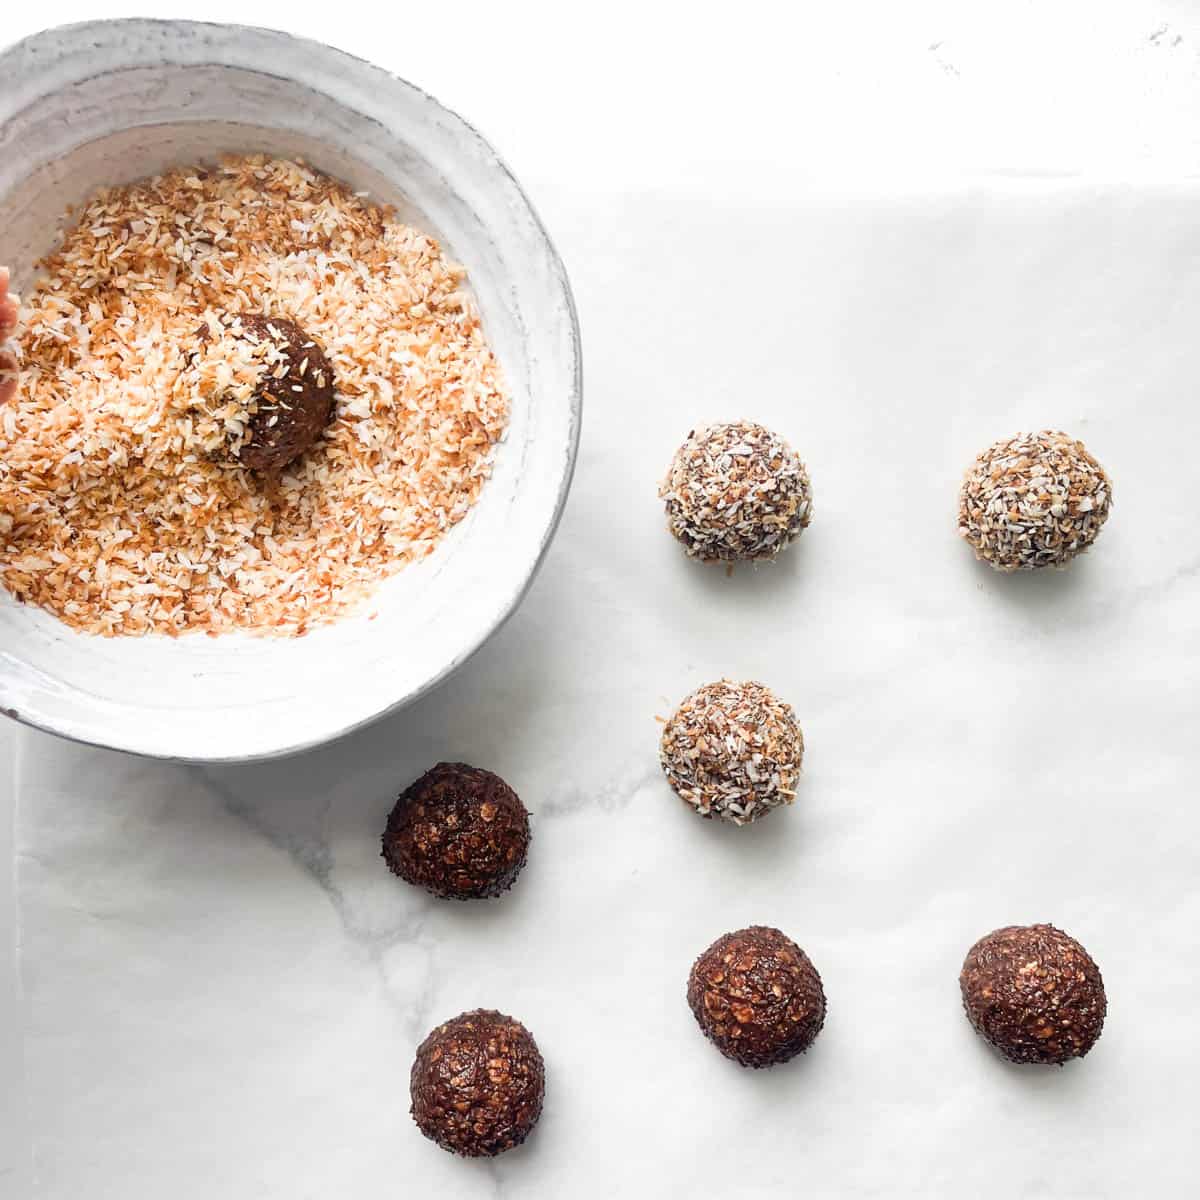 Chokladbollar being covered with toasted coconut.